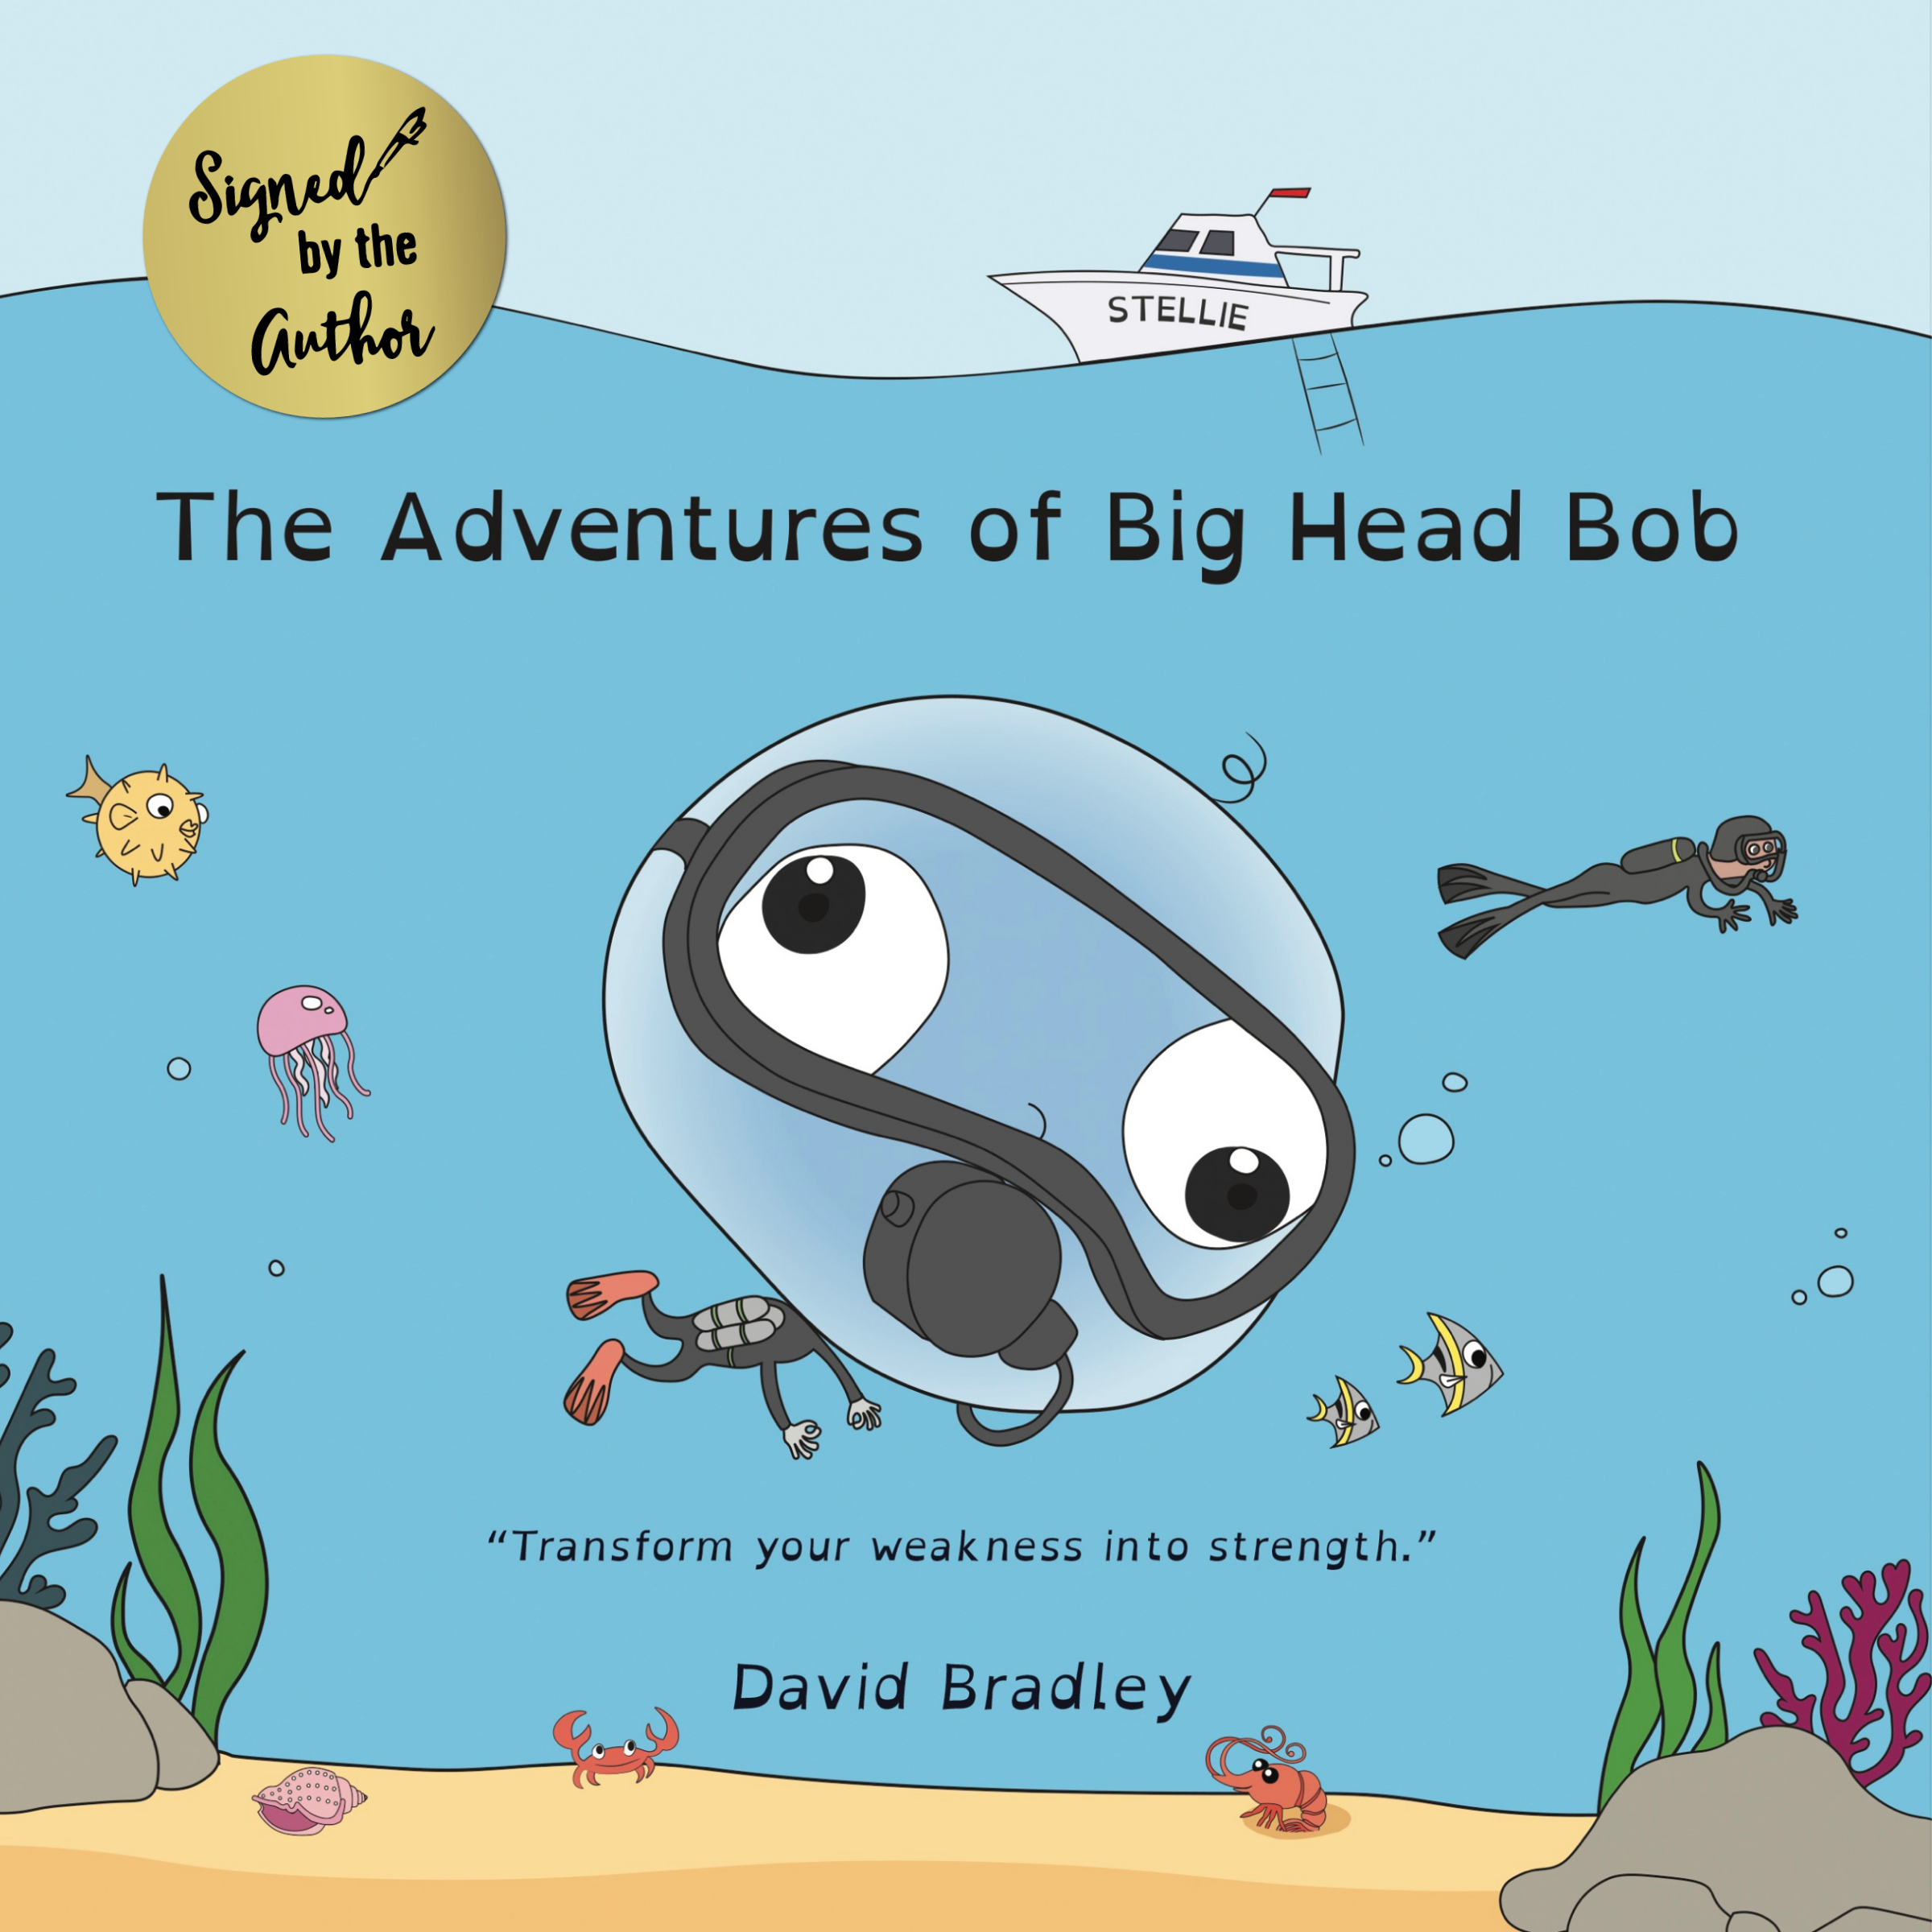 Book 1 Package - Signed Copy of The Adventures of Big Head Bob - Transform Your Weakness into Strength